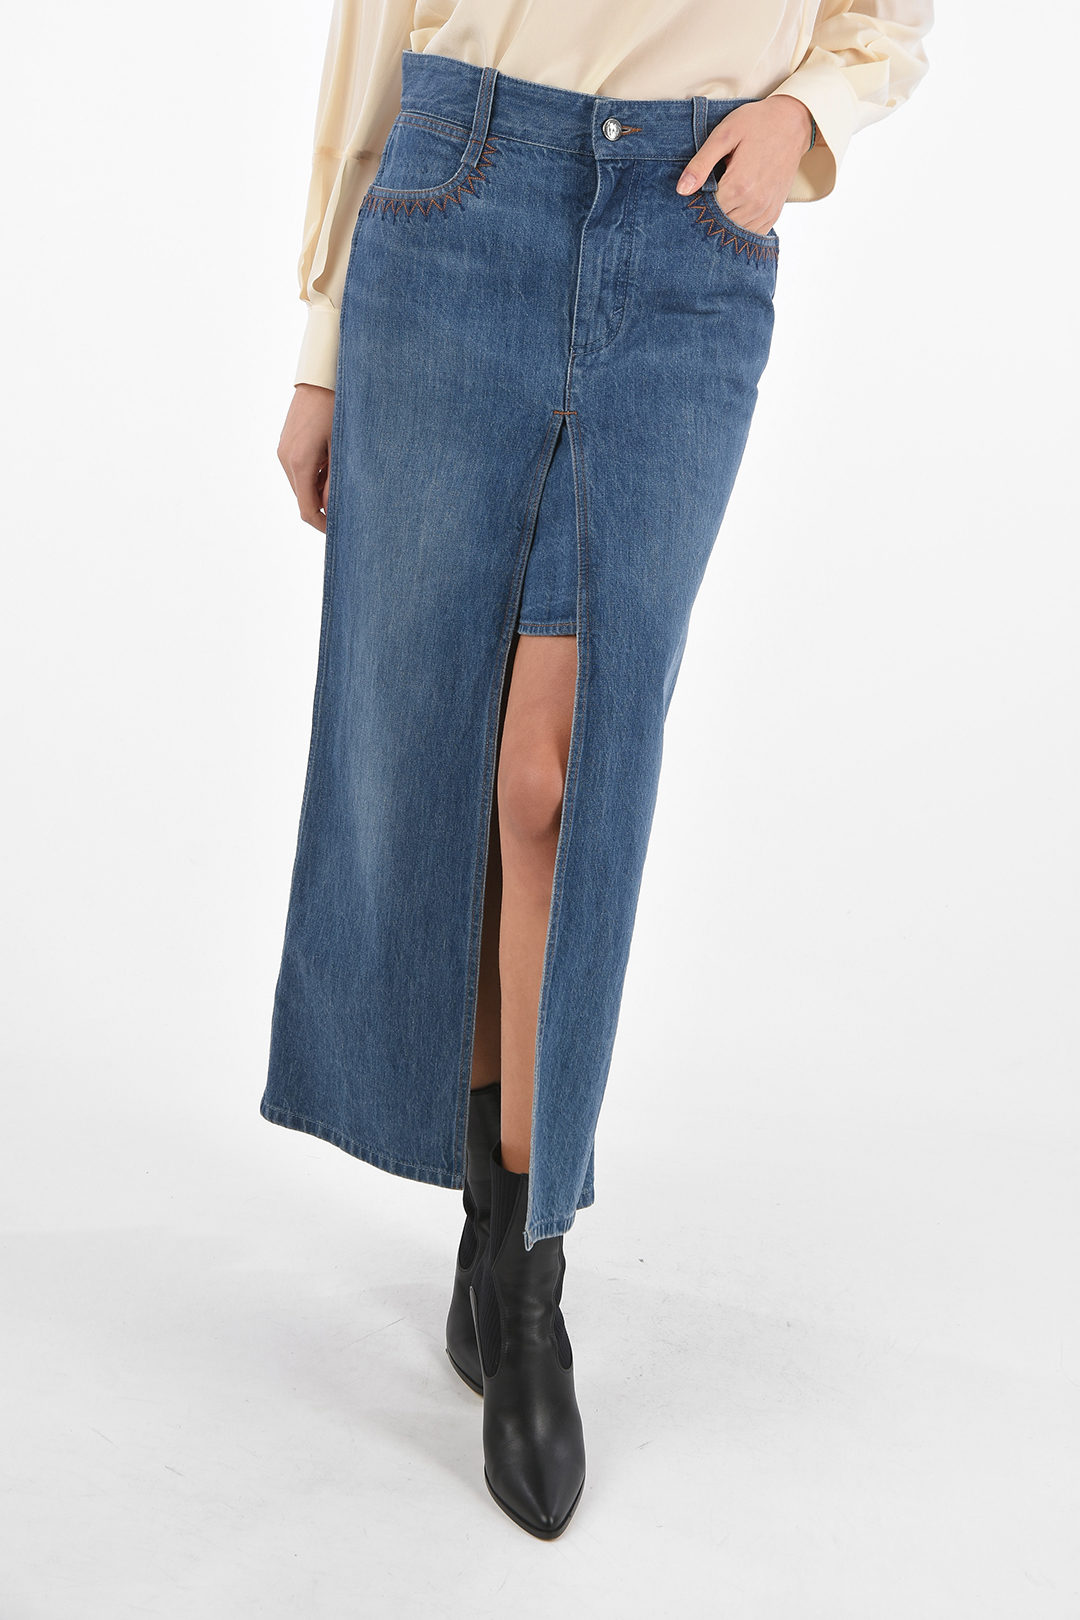 Denim Long Skirt with Front Split and Embroideried Details